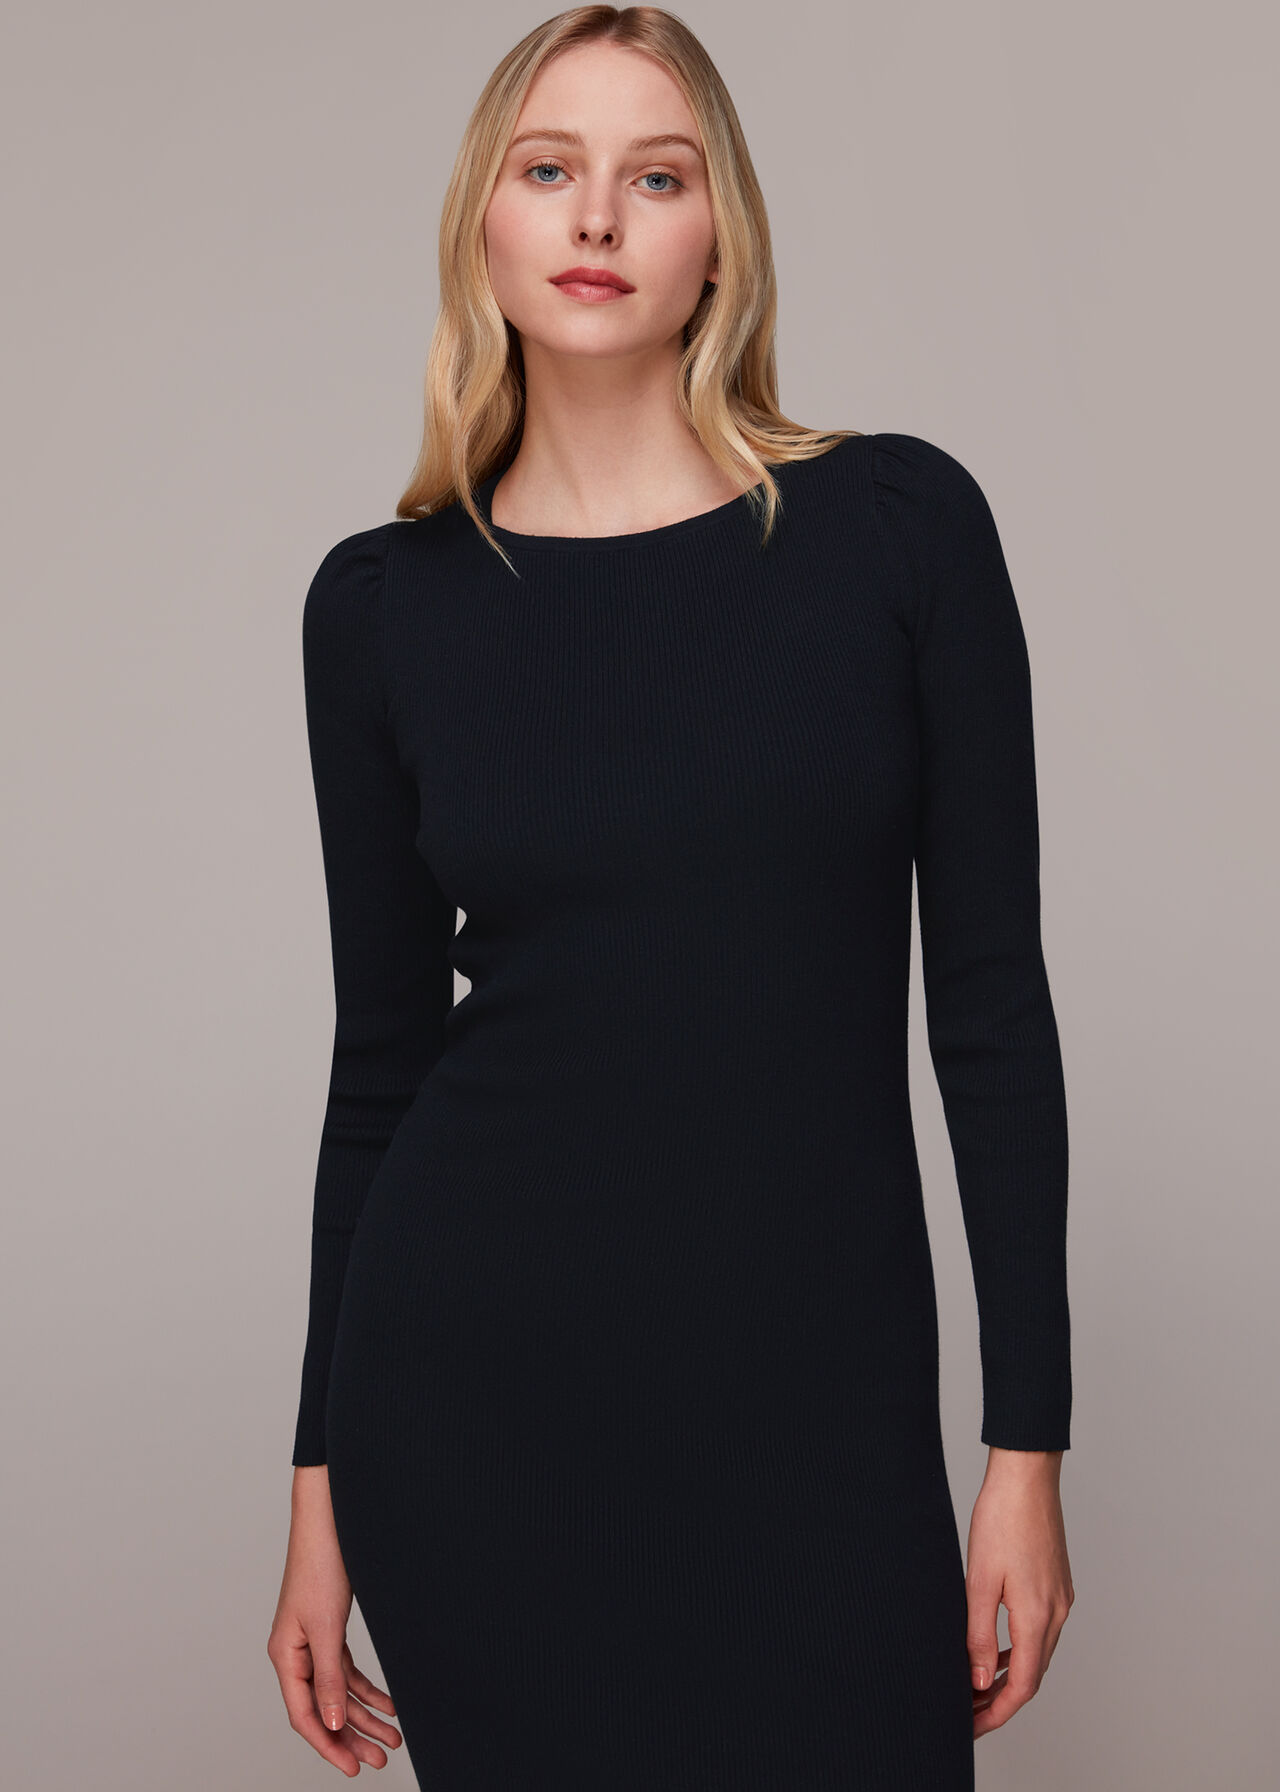 Cut Out Twist Knitted Dress